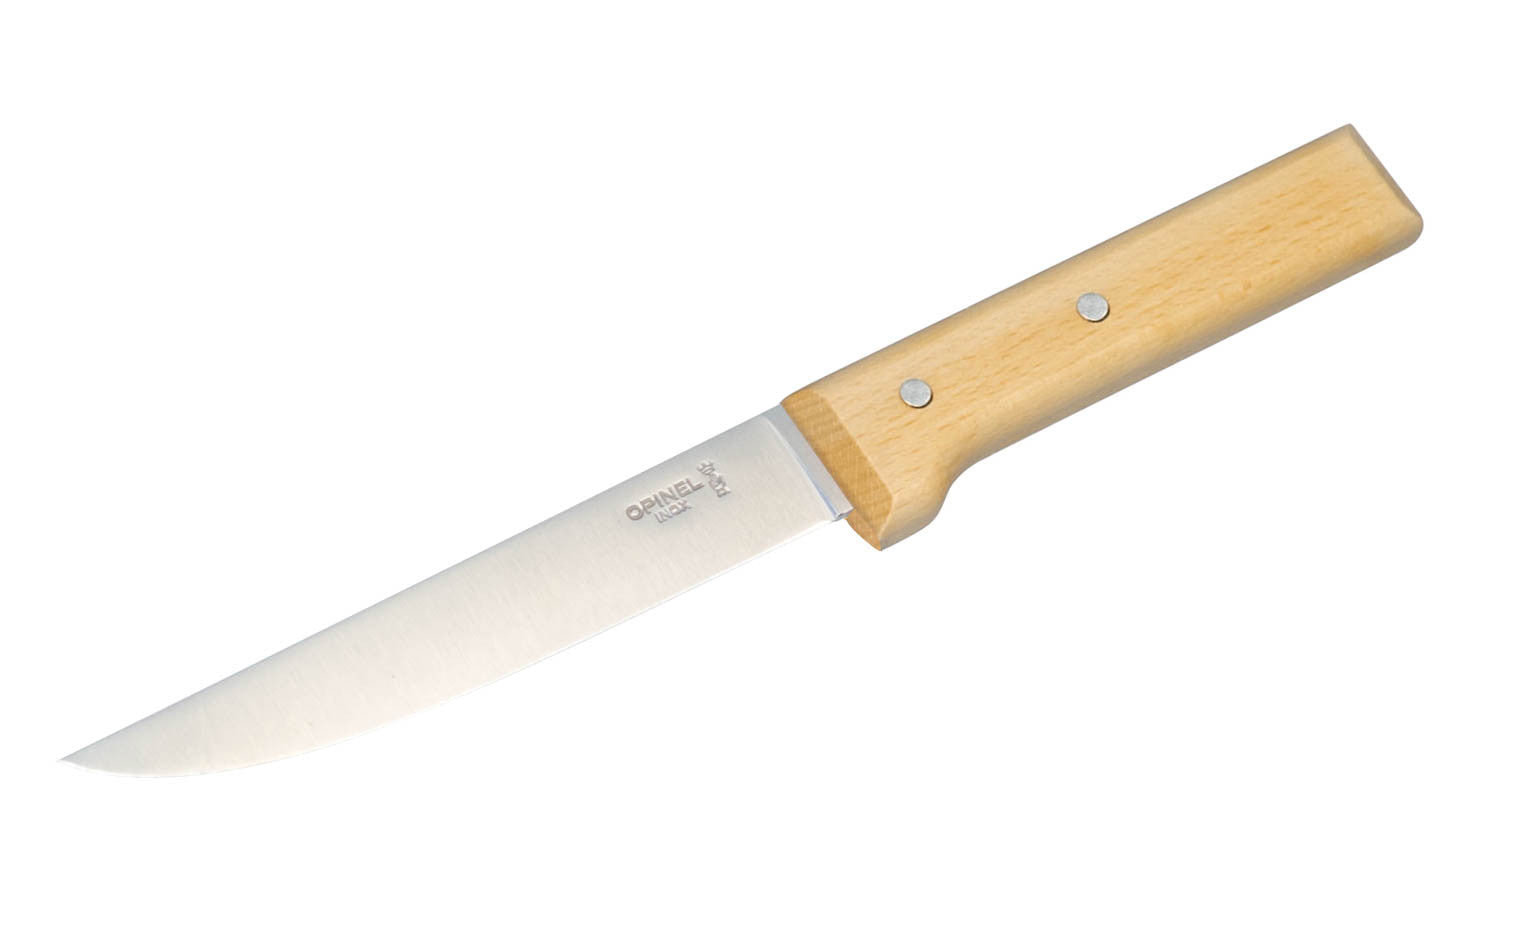 Opinel Carving Knife. Model No. 120 ~ Excellent for carving roasts & meats ~ Well-balanced feel in hand ~ Varnished Beechwood handle.